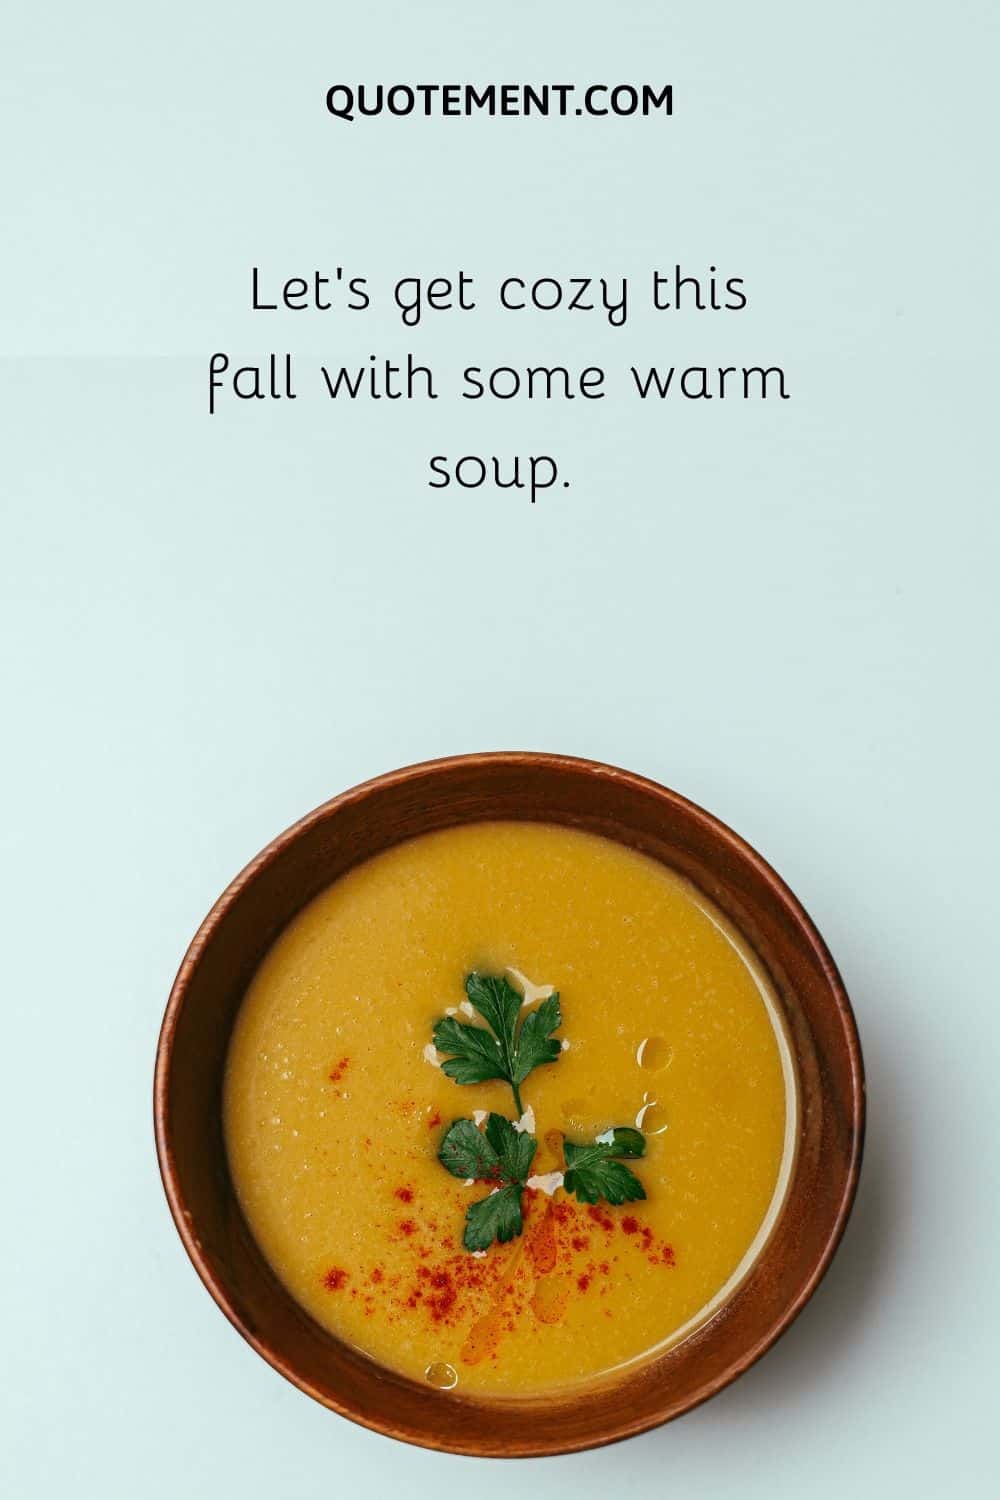 Let’s get cozy this fall with some warm soup